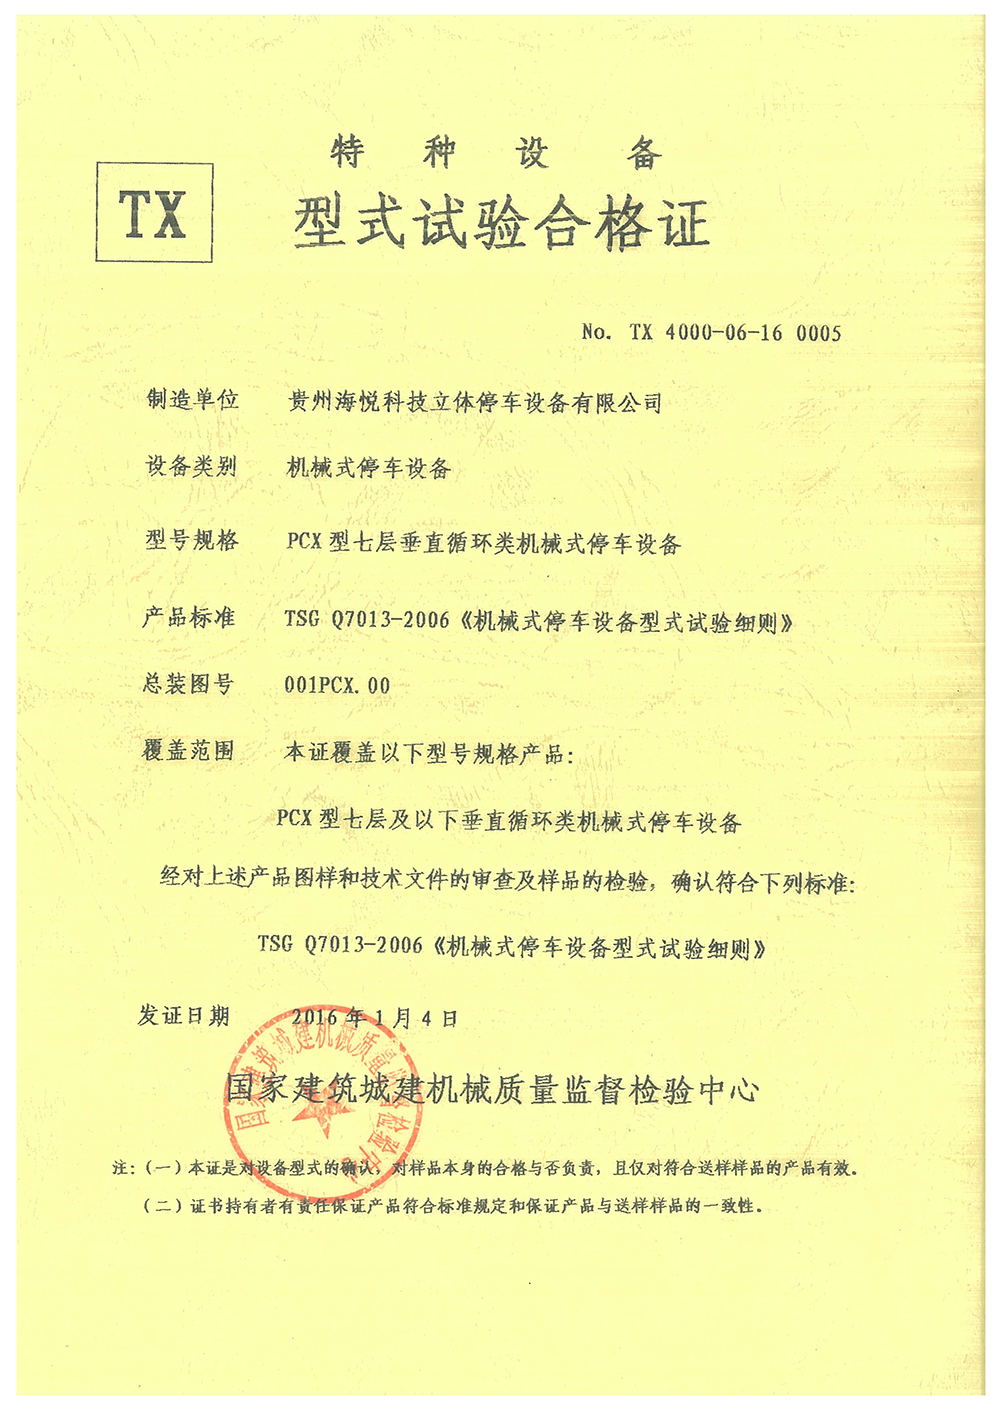 PCX seven-layer vertical circulation type test certificate